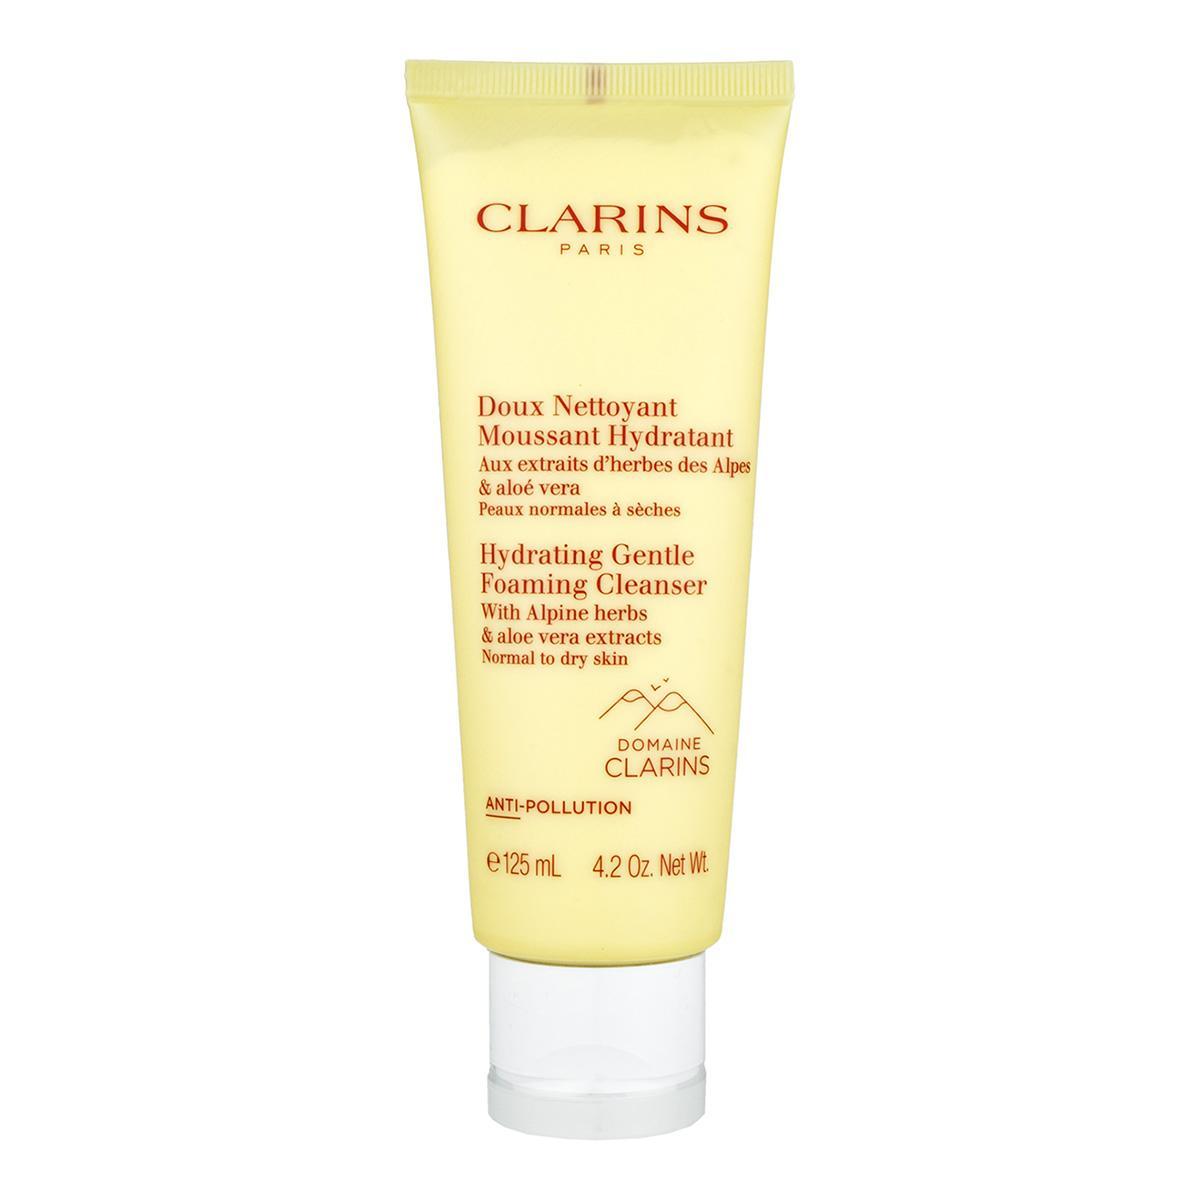 Clarins Purifying Gentle Foaming Cleanser With Alpine Herbs & Aloe Vera Extracts Почистваща пяна за нормална към суха кожа без опаковка